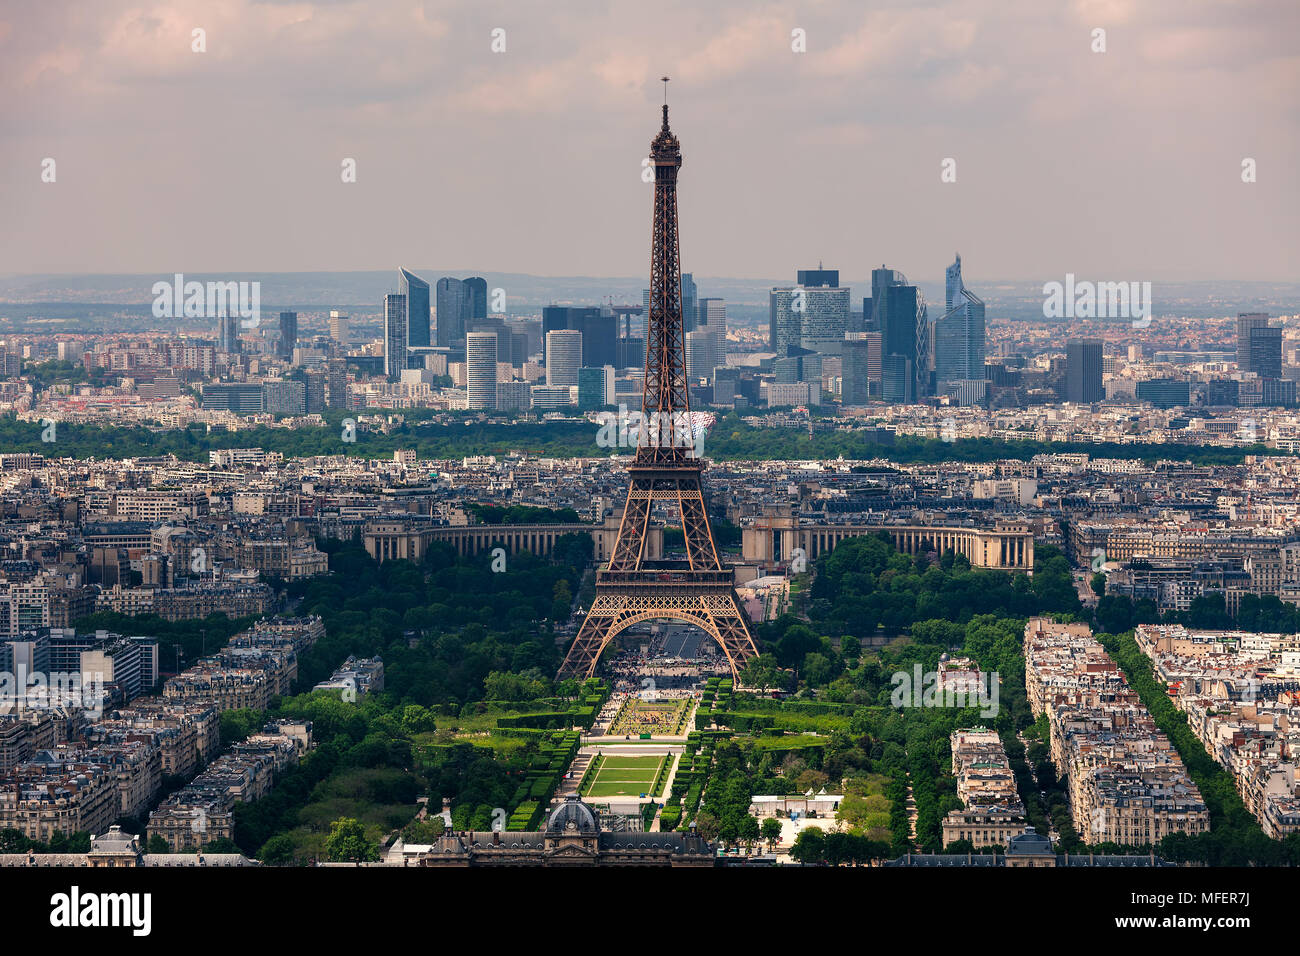 Aerial view of Eiffel Tower, Champ de Mars and La Defense district on background as seen from Montparnasse Tower in Paris, France. Stock Photo